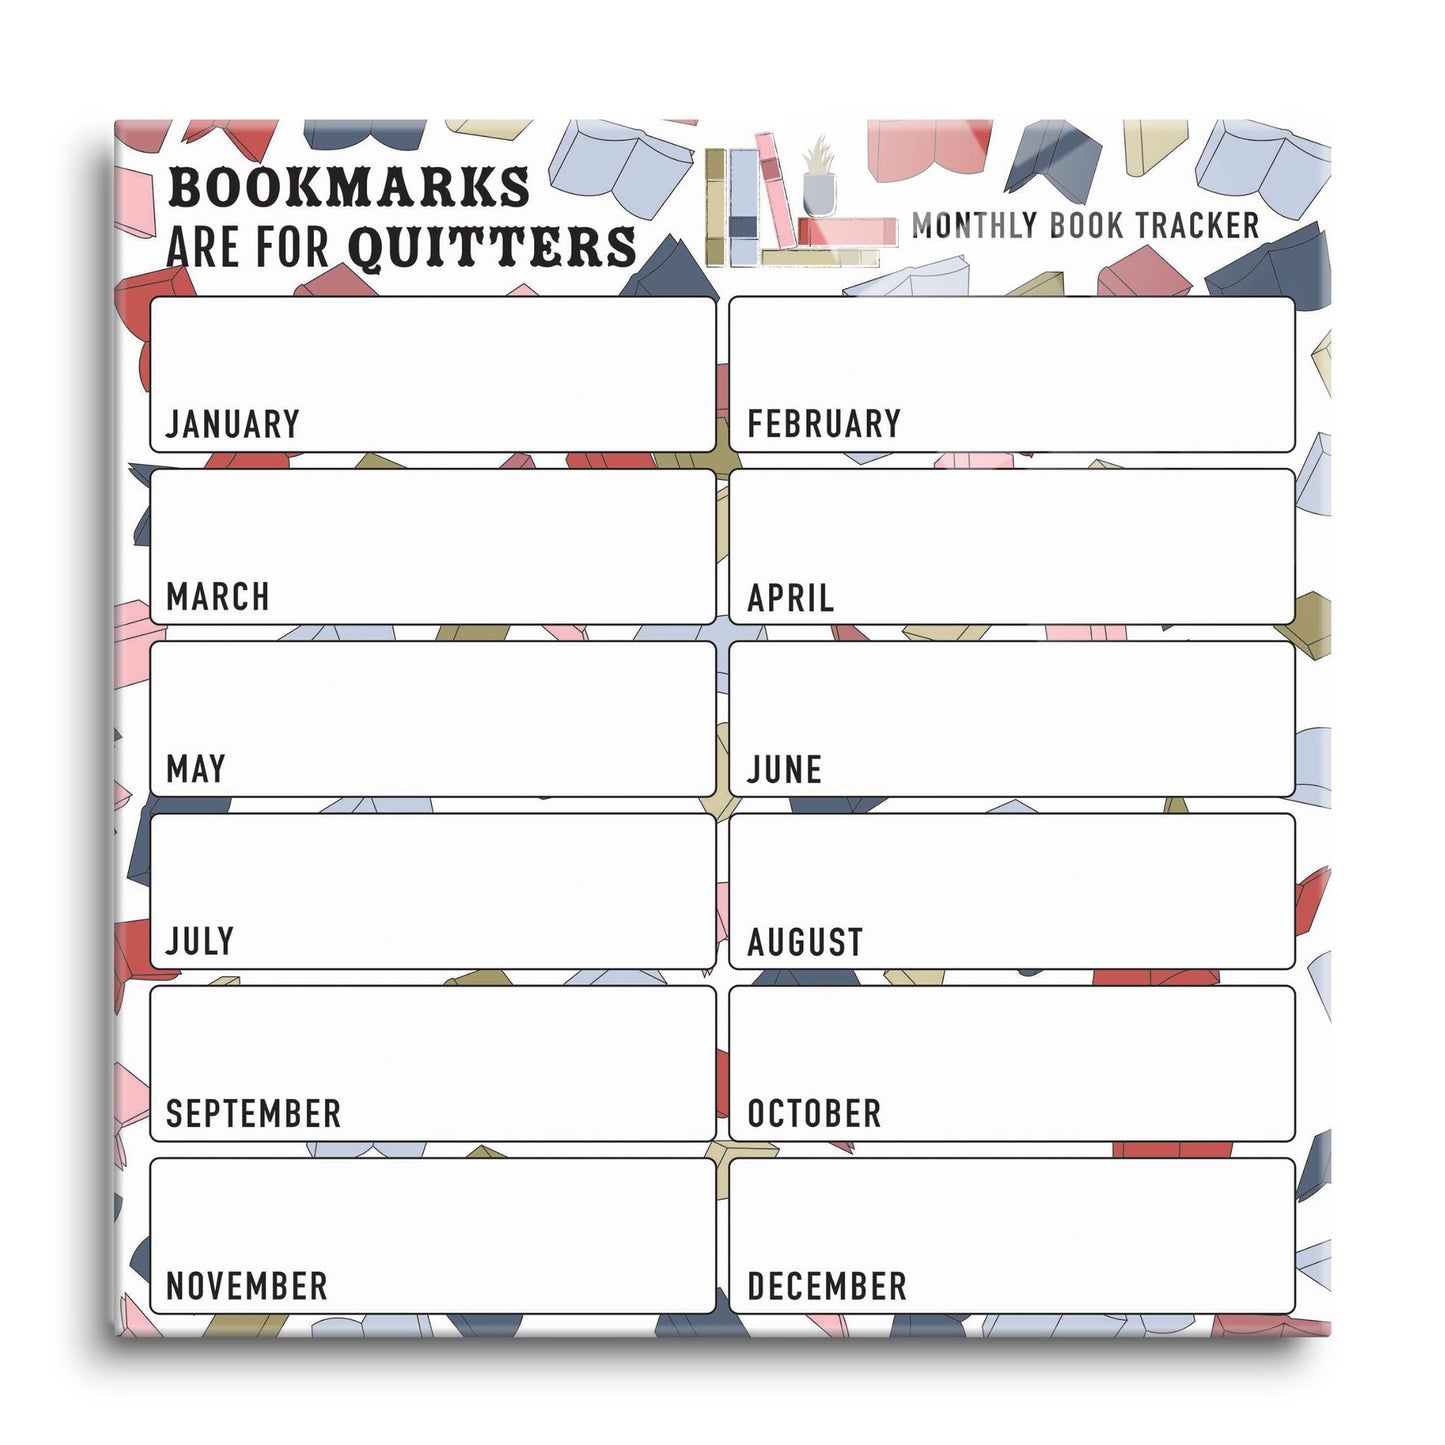 Yearly Book Tracker Bookmarks are for Quitters | 12x12